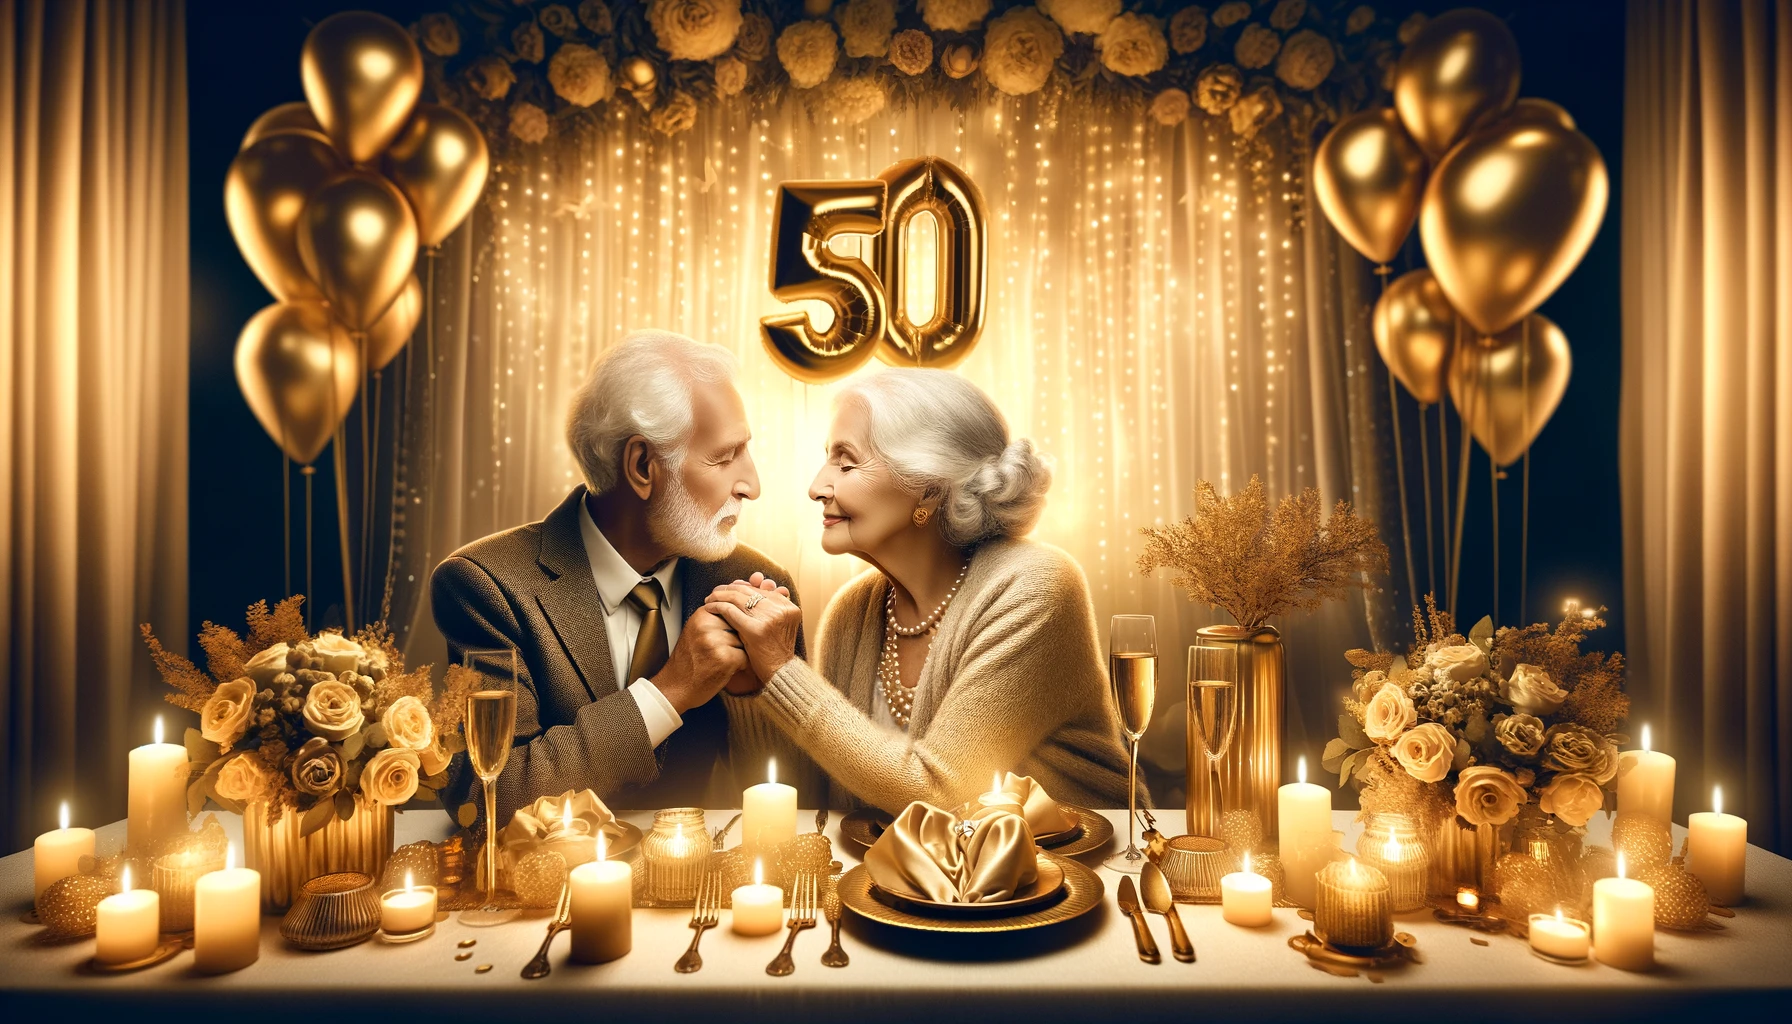 Overview of the 50th Wedding Anniversary